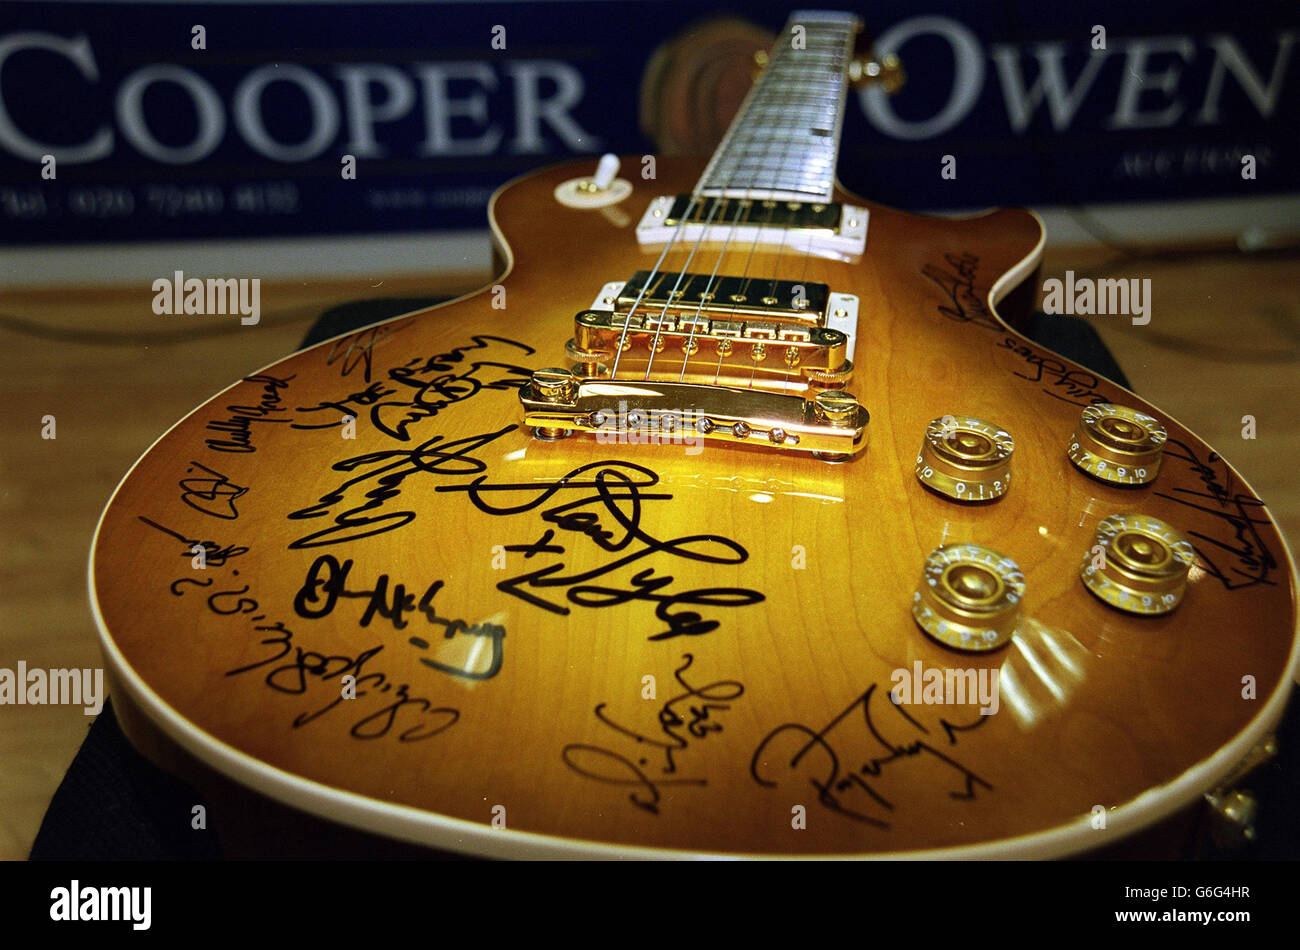 A 1996 Gibson Les Paul standard guitar signed and played for over a year by Jimmy Page a former member of Led Zeppelin. The Guitar which is also signed by many big name artists including Steve Tyler from Aerosmith, Alice Cooper and the Sterophonics, is being auctioned tomorrow in aid of the ABC Trust, along with other rock memorabilia including and early Jim Morrison poem and one of David Bowies contracts. Stock Photo